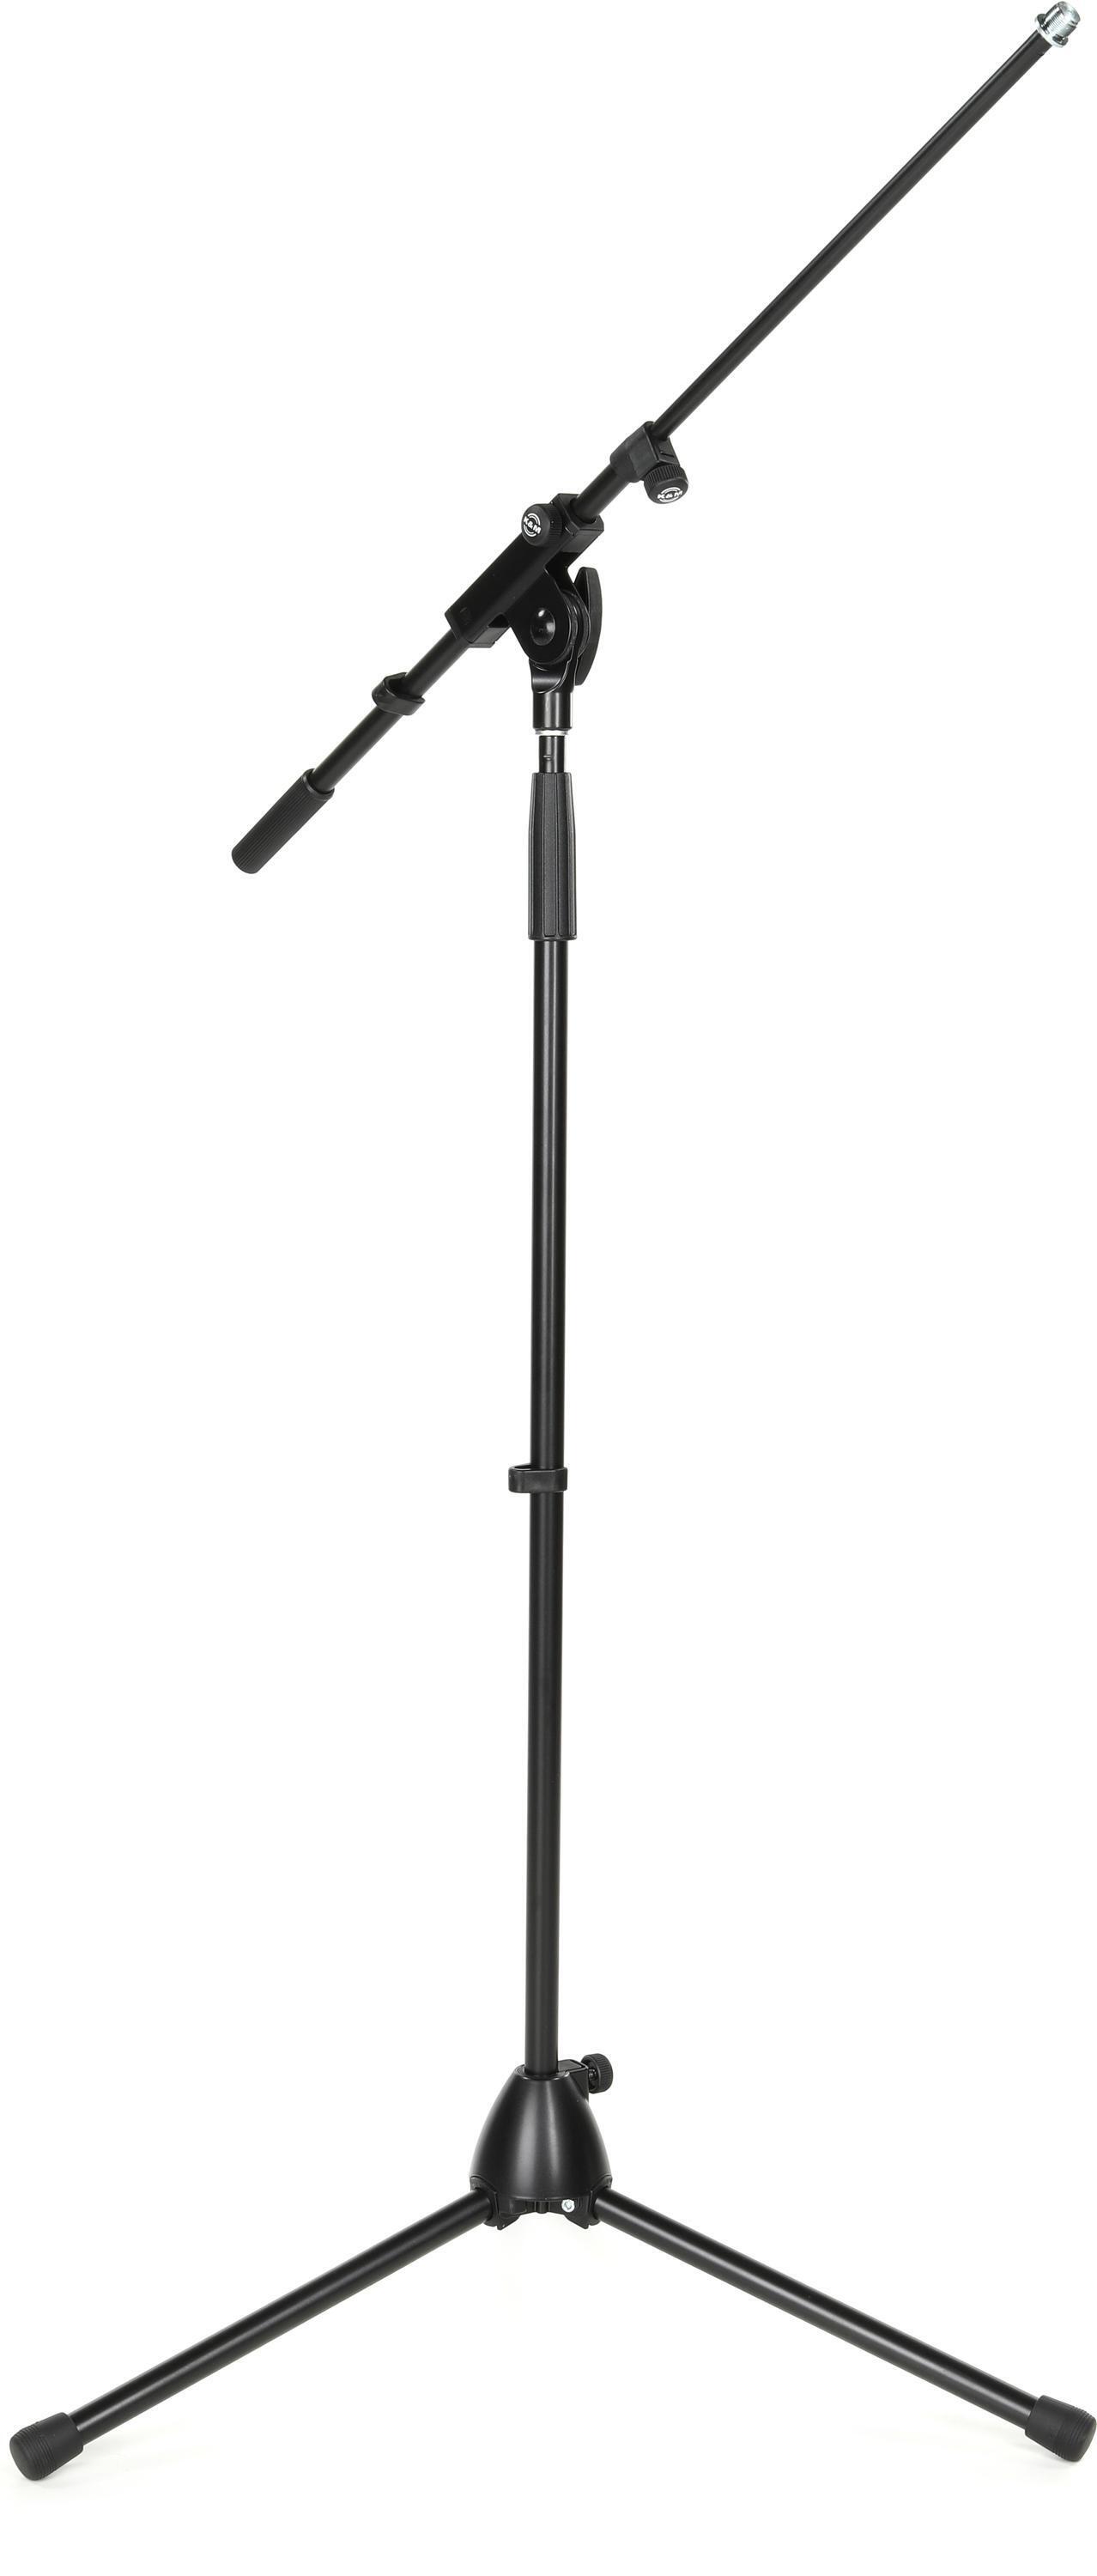 Bundled Item: K&M 21075 Microphone Stand with Telescoping Boom Arm - Black